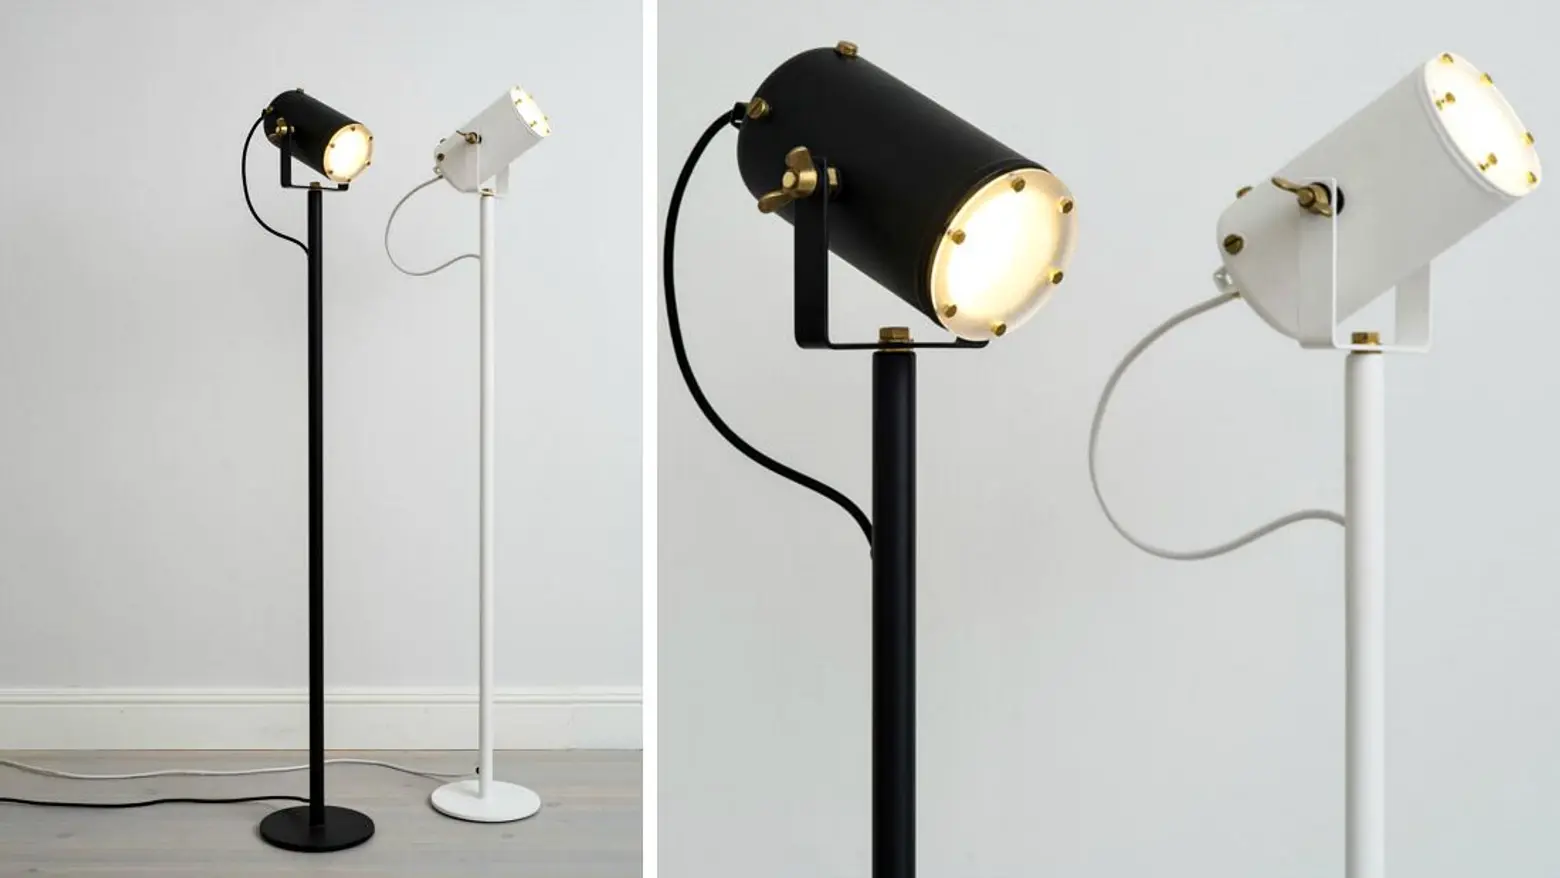 Boiler Lamp, Willem Heeffer, The City as a Mine, upcycled design